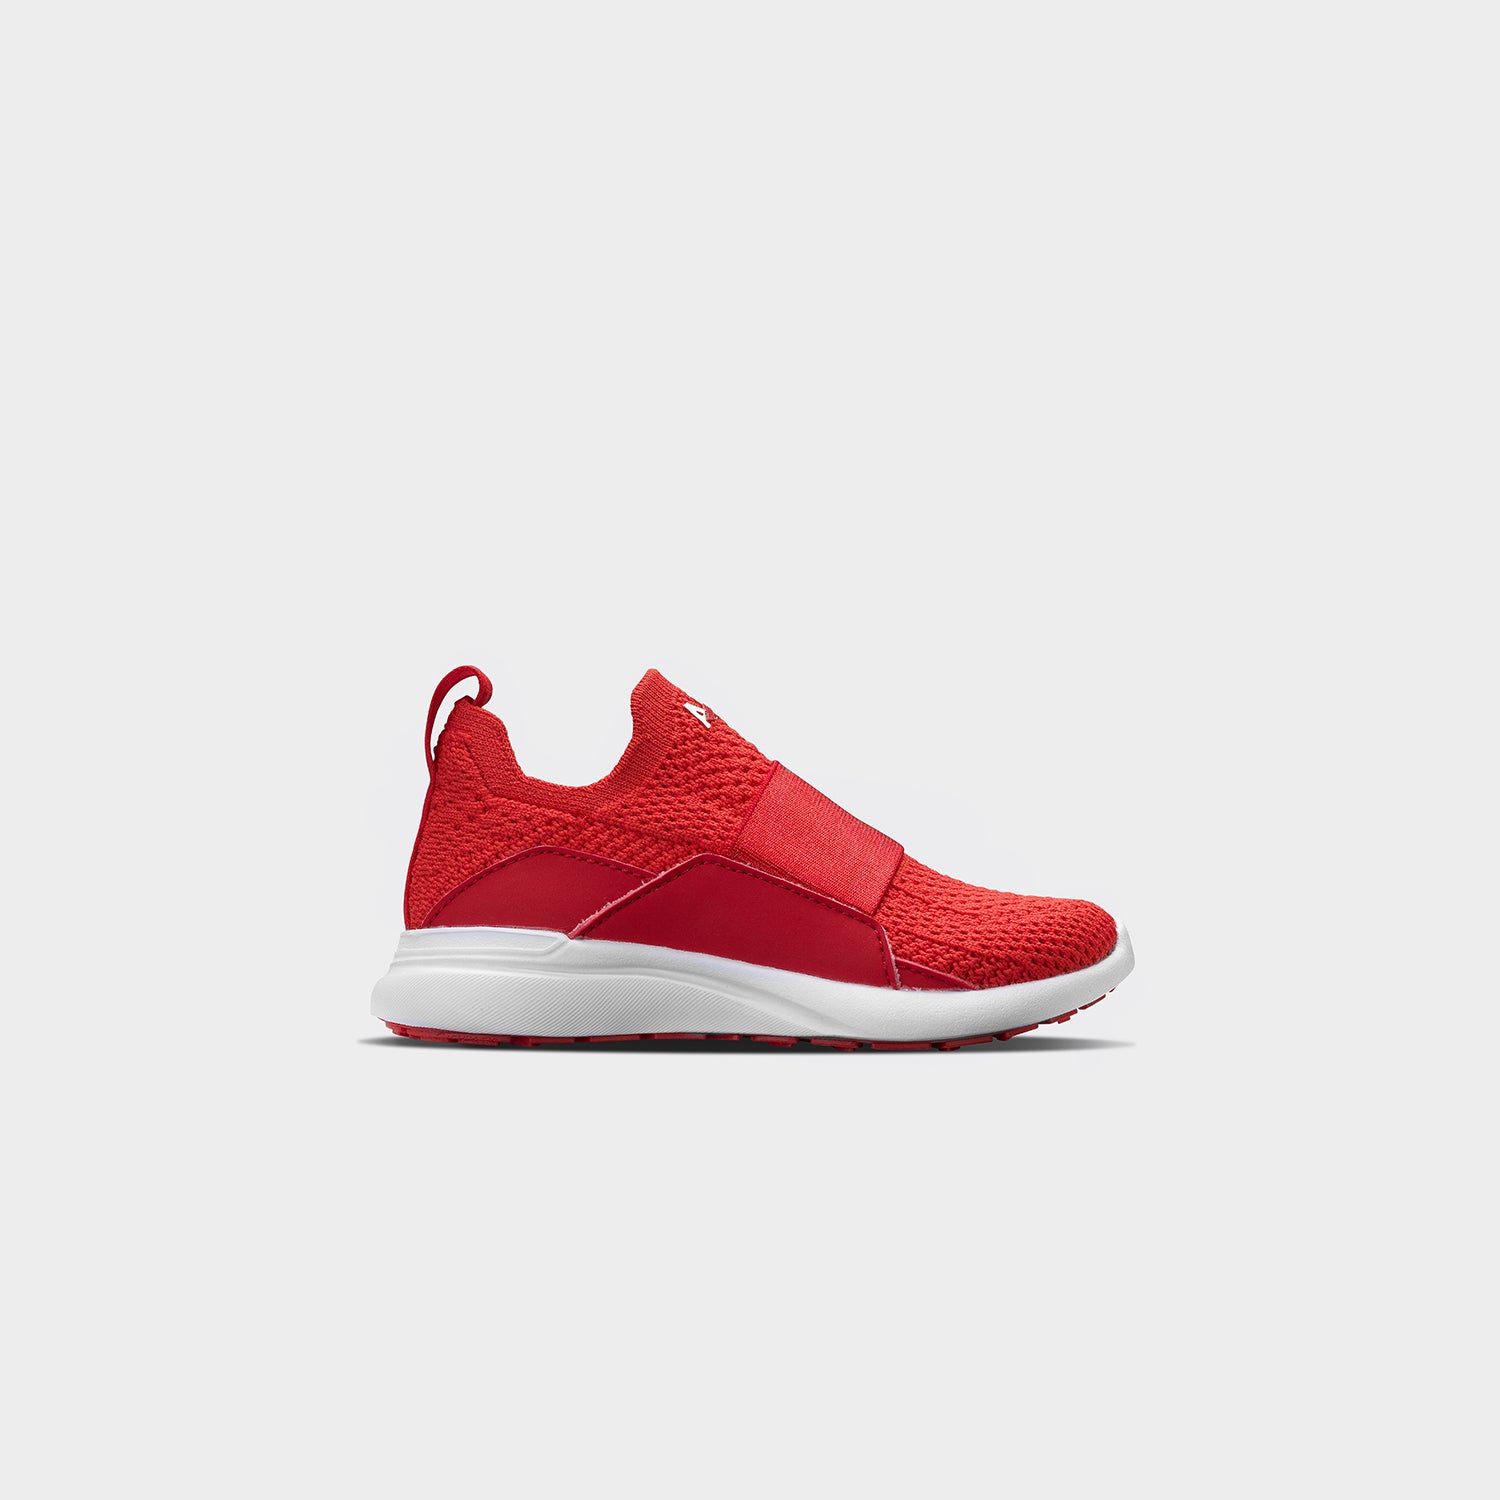 red apl sneakers